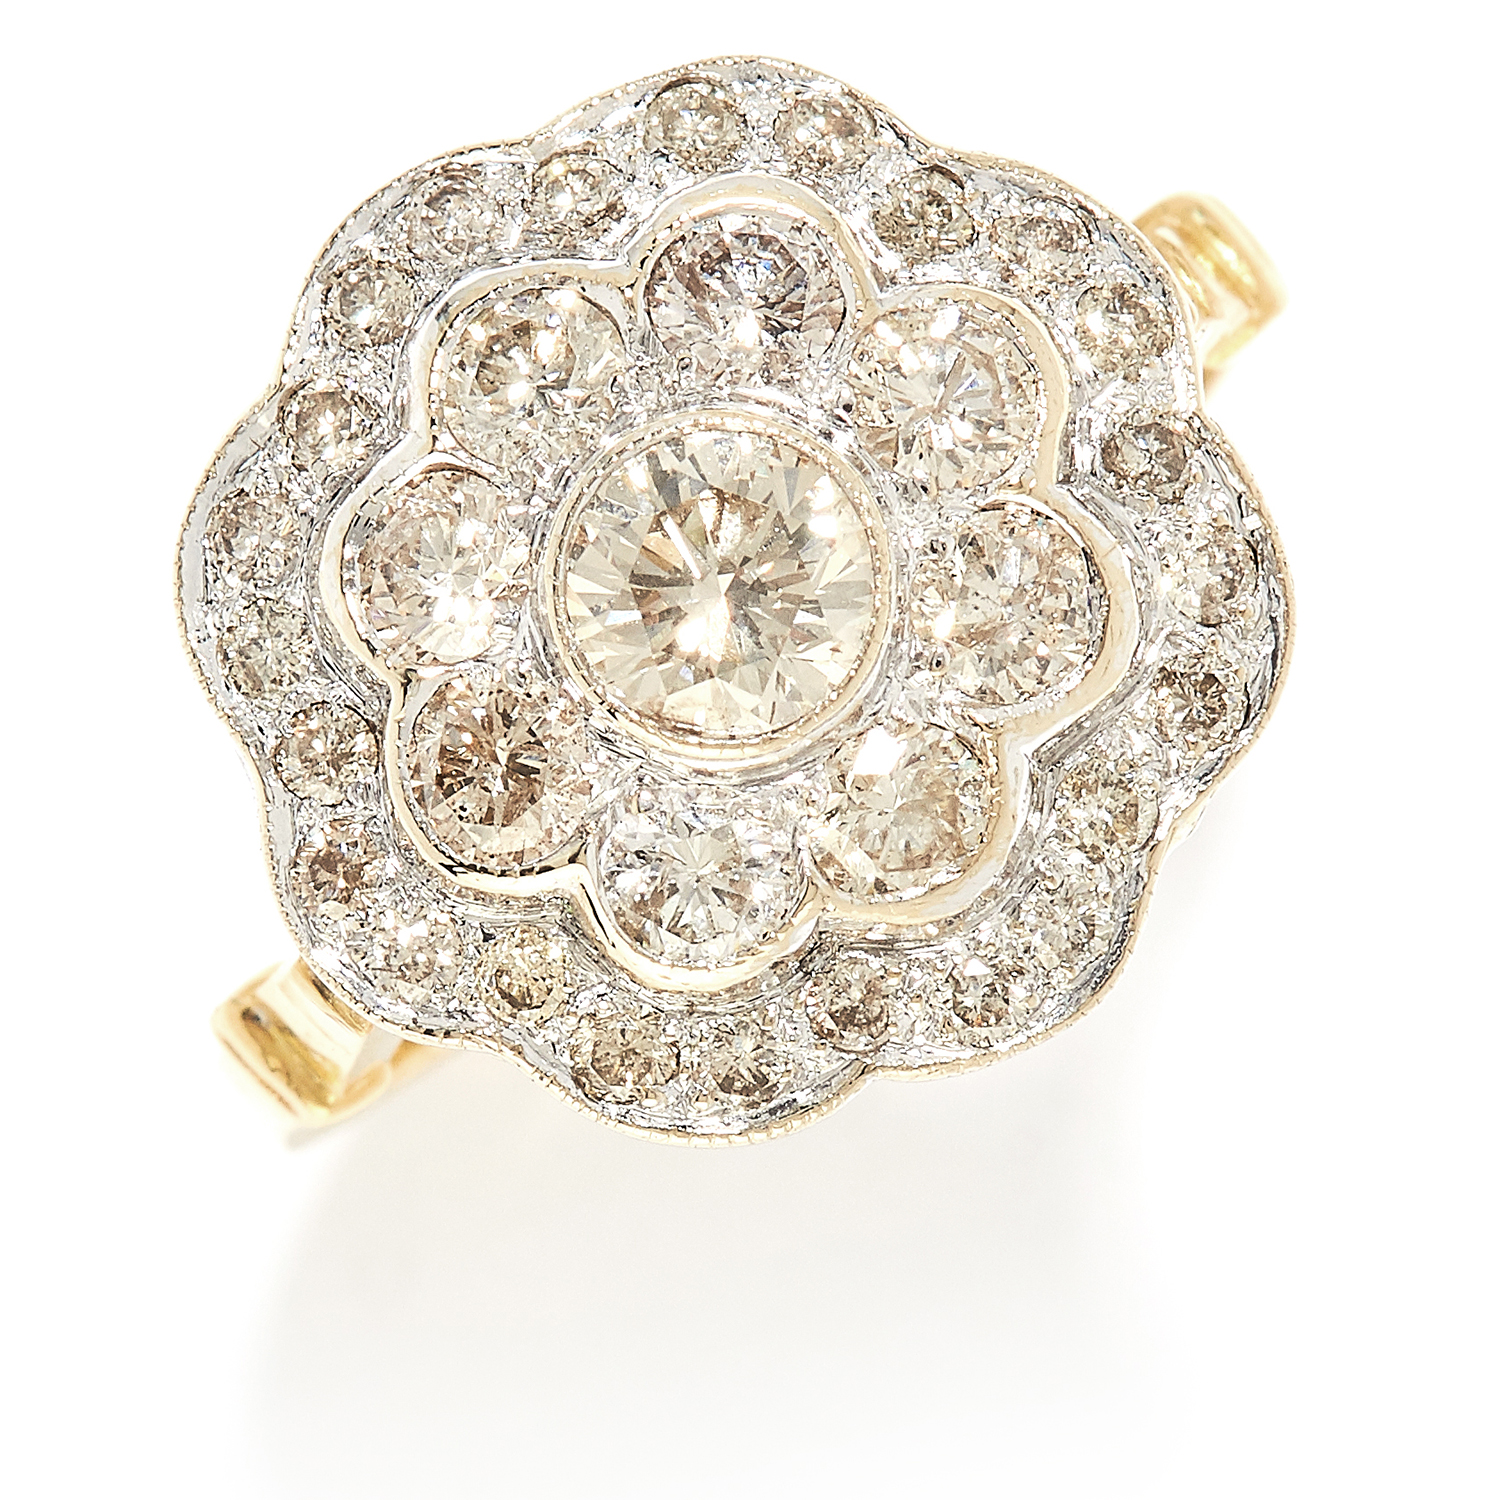 1.70 CARAT DIAMOND CLUSTER RING in high carat yellow gold, set with round cut diamonds totalling